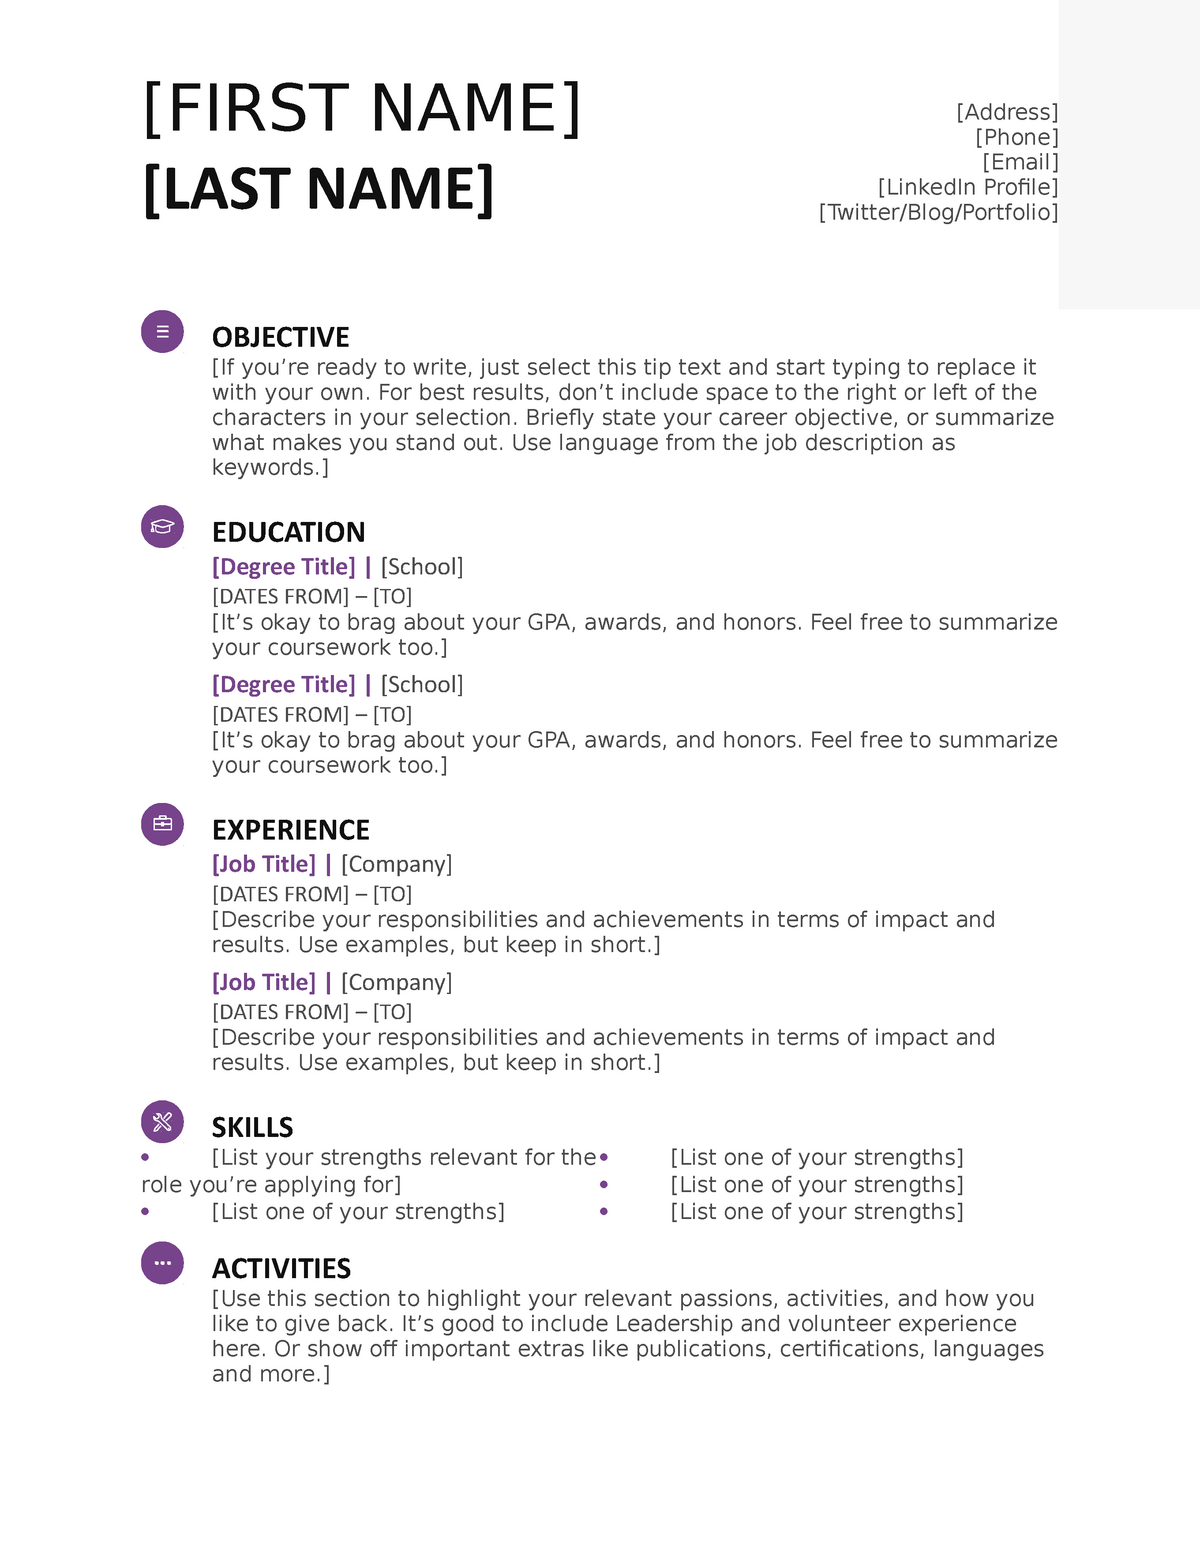 Violet resume - [FIRST NAME] [LAST NAME] [Address] [Phone] [Email ...